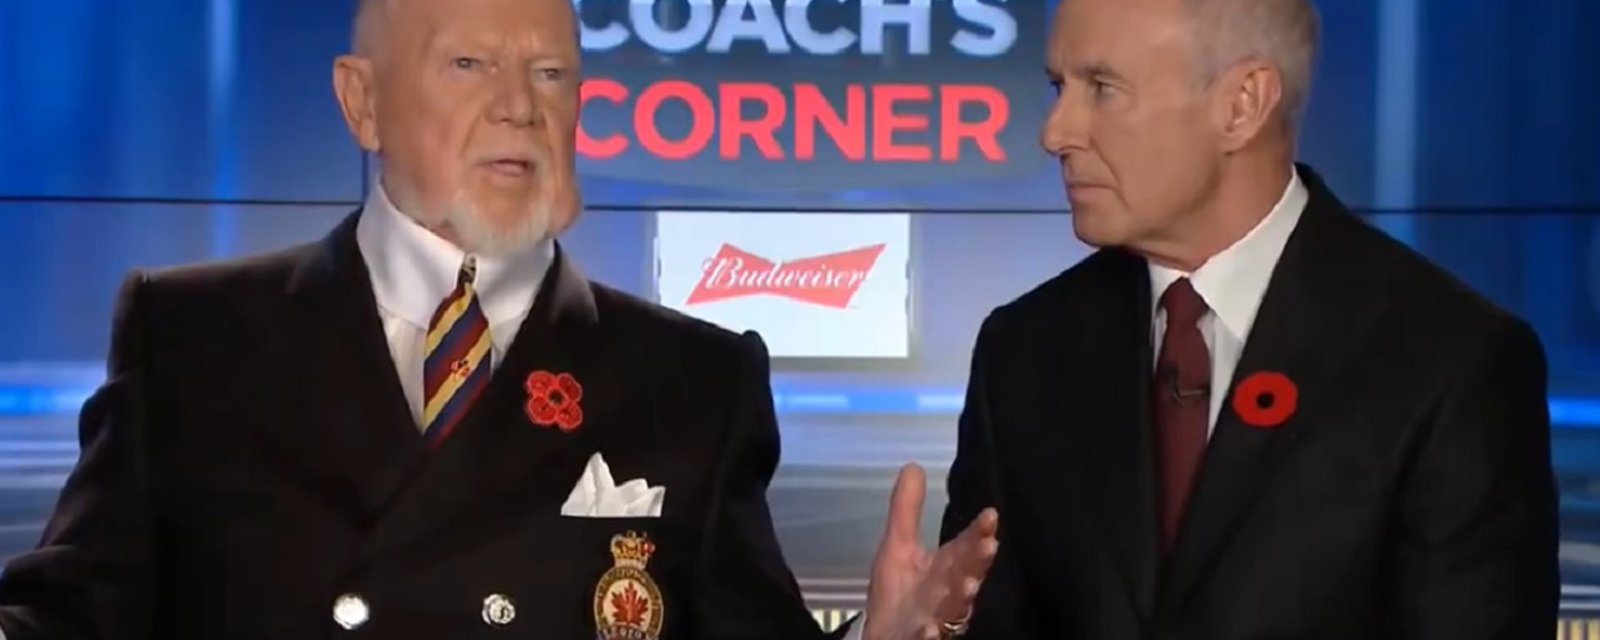 Don Cherry under fire for comments on immigrants and Remembrance Day.